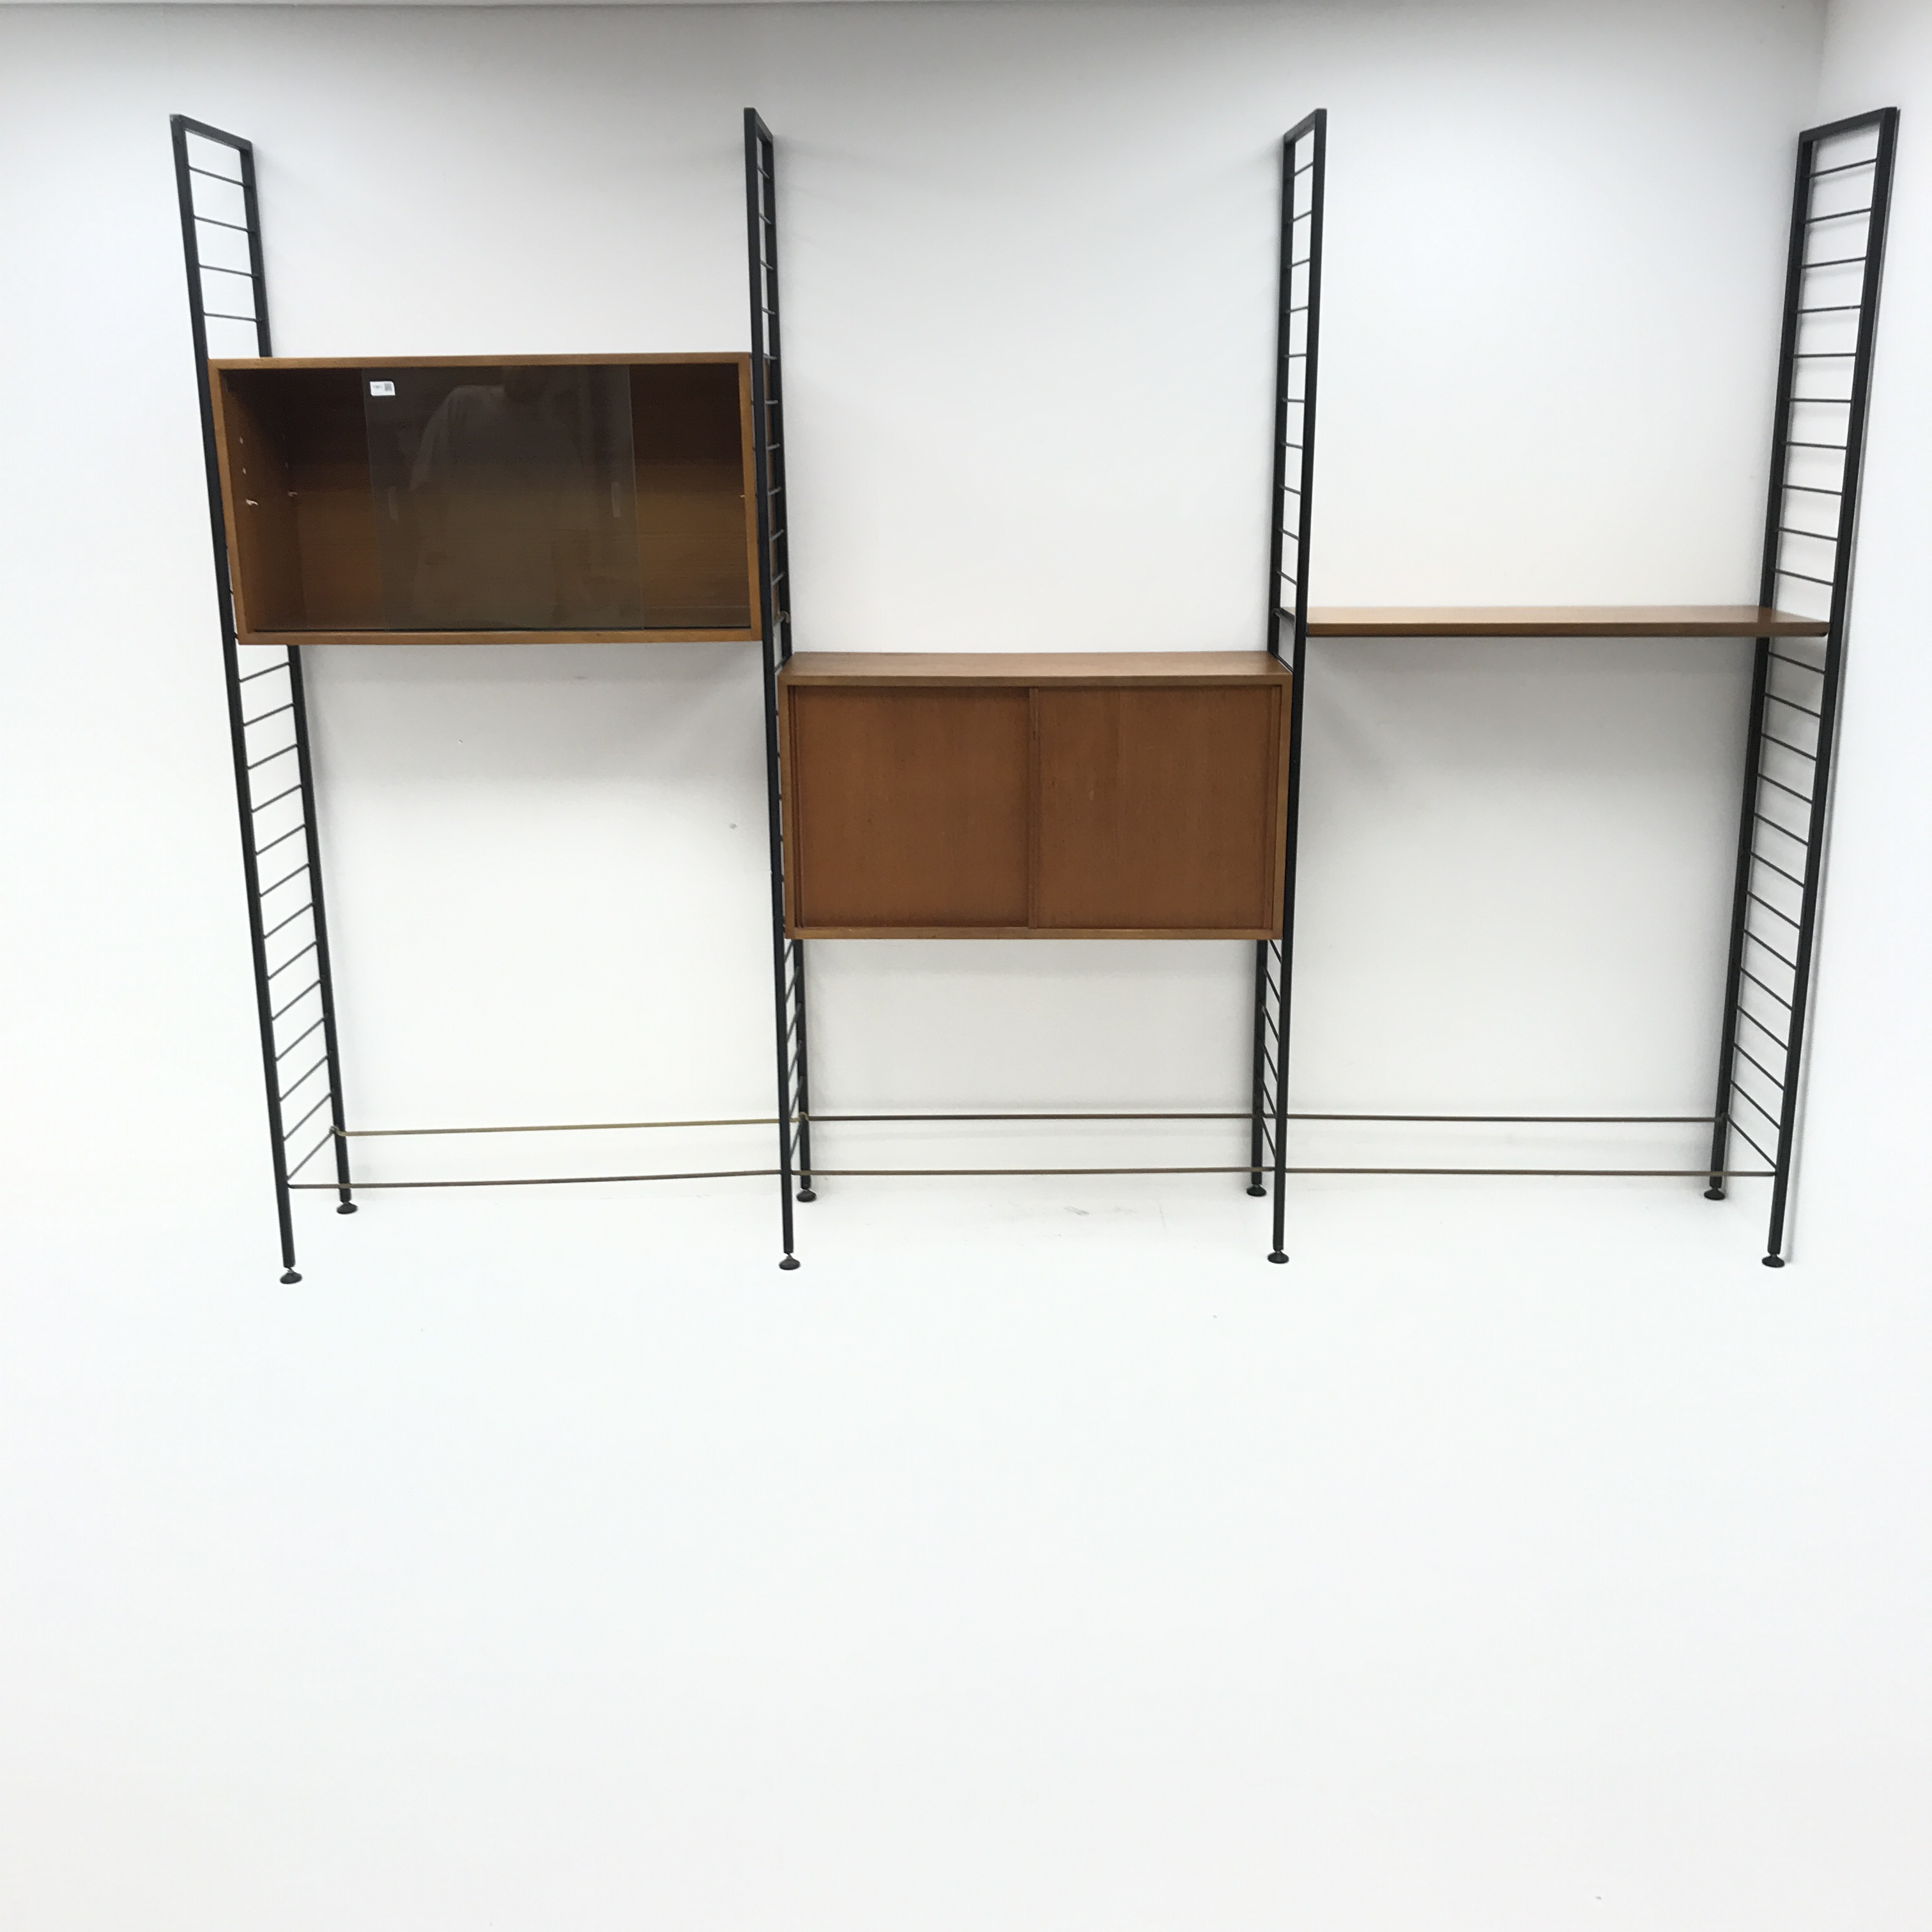 Staples Ladderax three bay sectional wall unit, two teak units comprising of solid and glazed slidin - Image 15 of 16